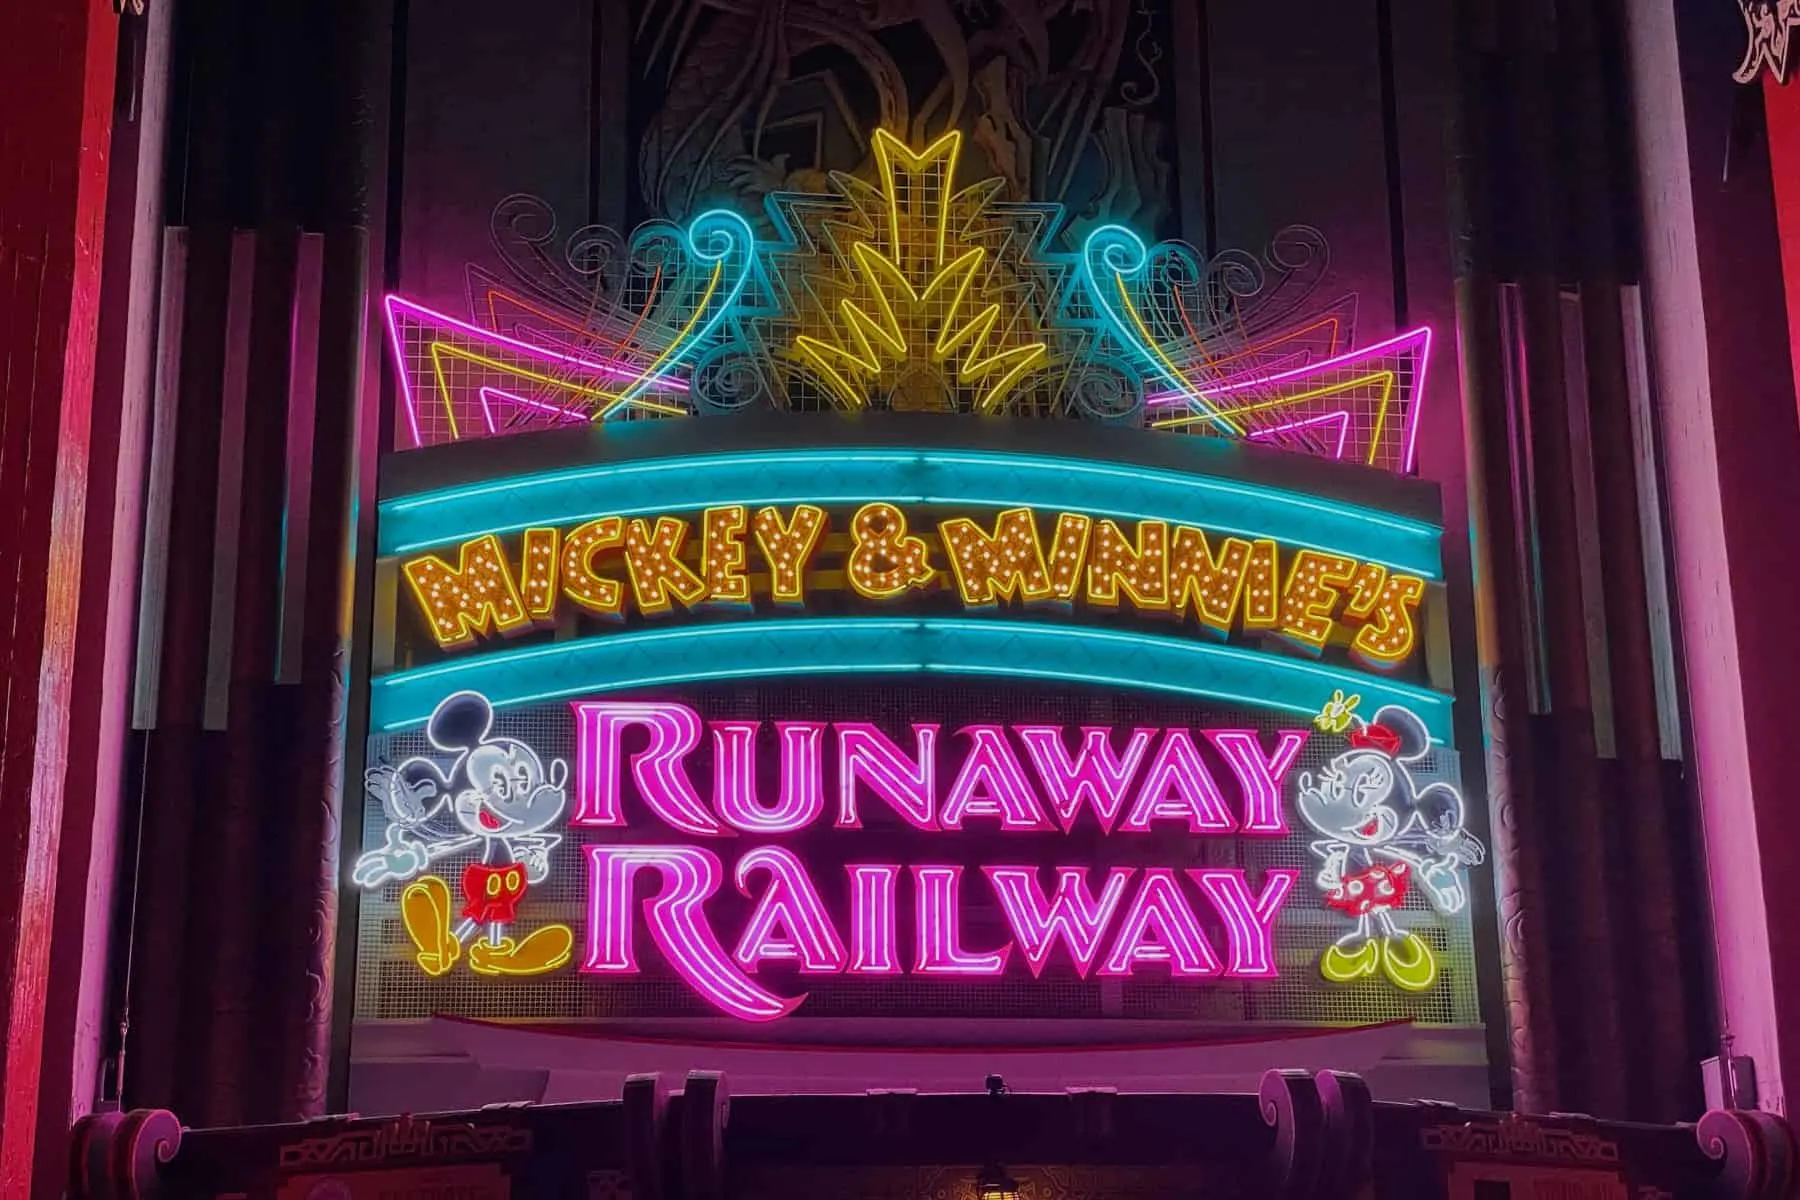 Complete Guide to Mickey & Minnie’s Runaway Railway at Hollywood Studios